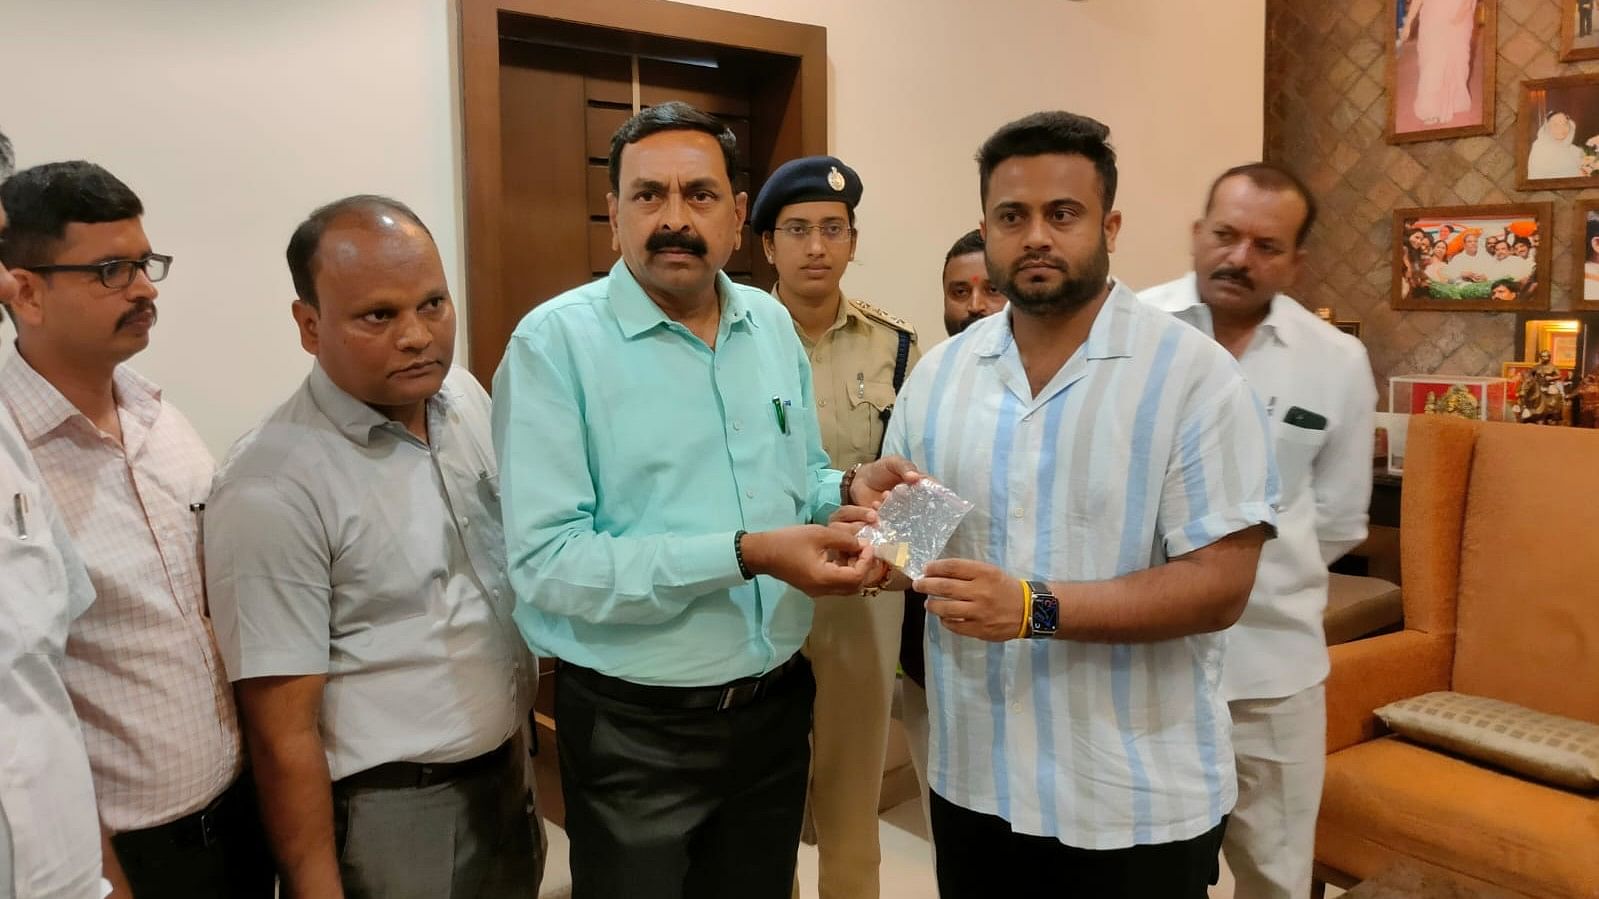 <div class="paragraphs"><p>Woman and Child Welfare Minister Laxmi Hebbalkar's son Mrinal handing over tiger claw-like pendant to Forest Department officials during search at the minister's residence in Belagavi on Friday.  </p></div>